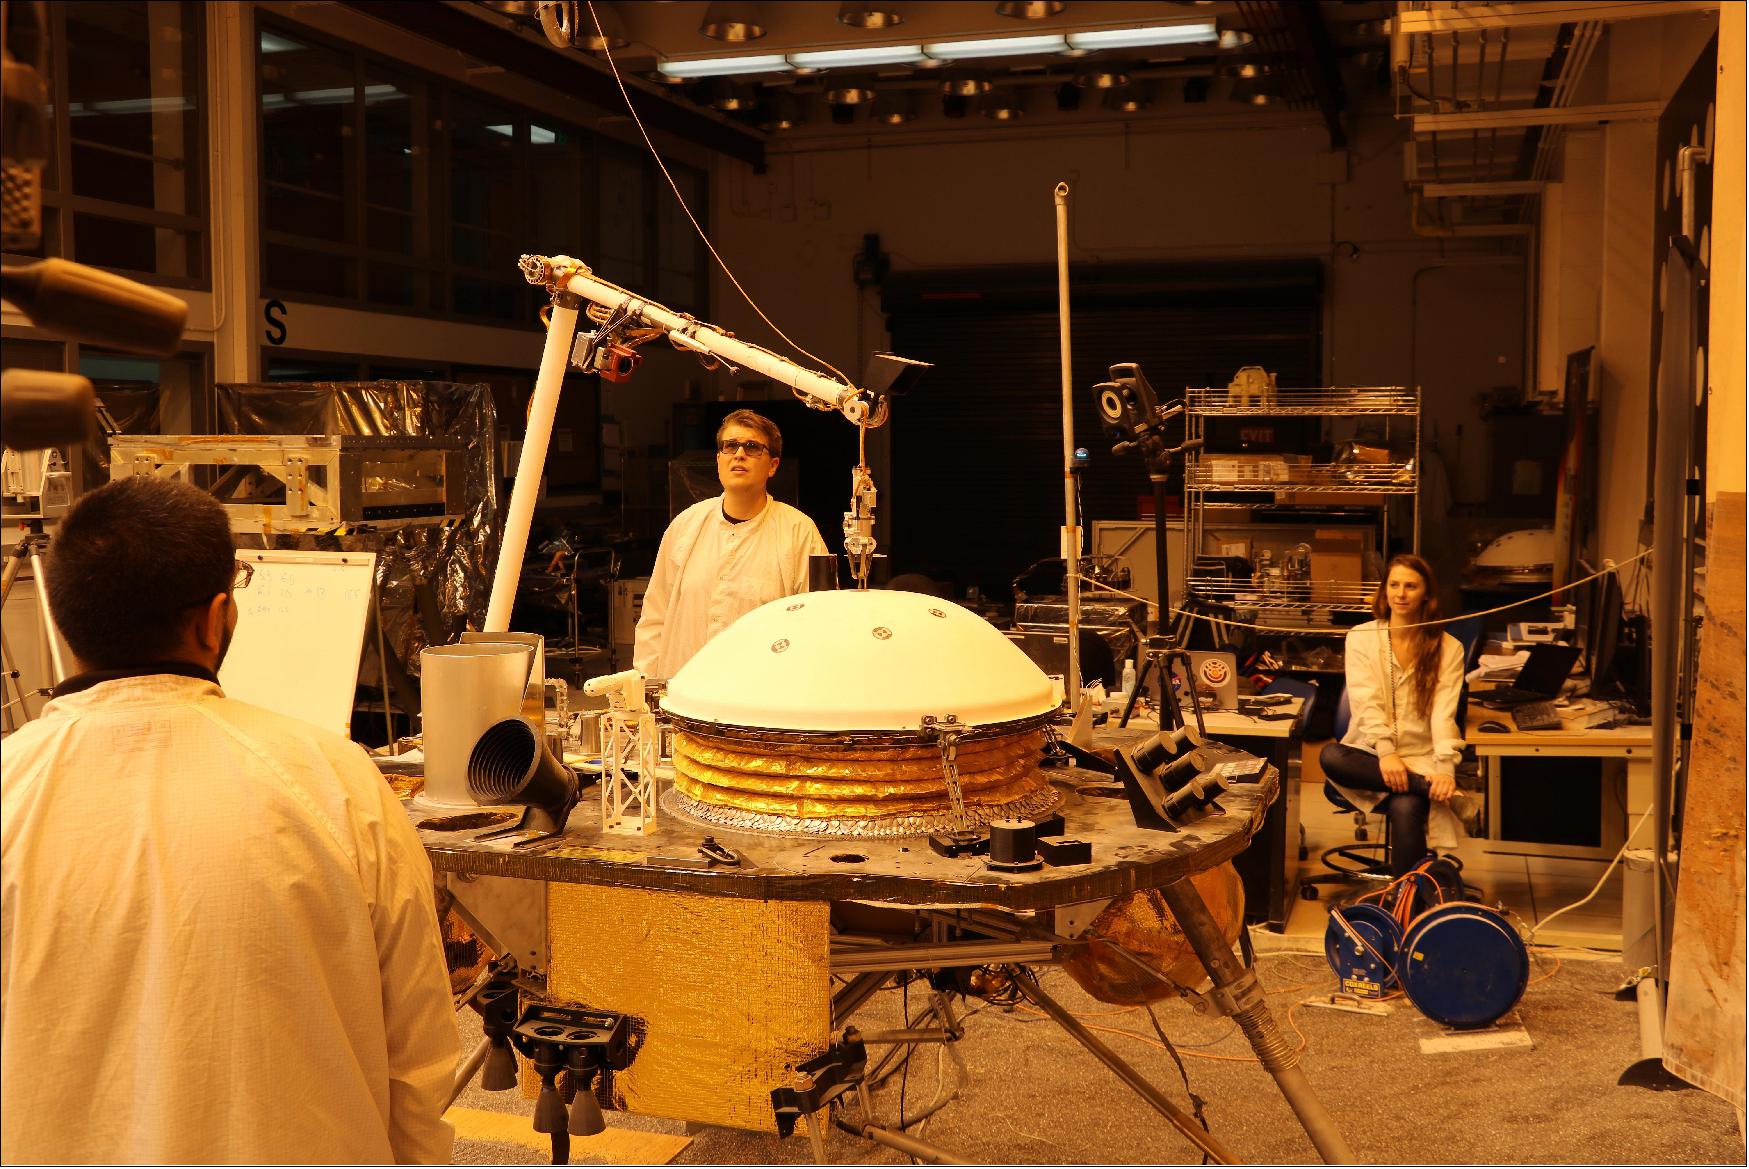 Figure 60: NASA's InSight mission tests an engineering version of the spacecraft's robotic arm in a Mars-like environment at NASA's Jet Propulsion Laboratory. The five-fingered grapple on the end of the robotic arm is lifting up the Wind and Thermal Shield, a protective covering for InSight's seismometer. The test is being conducted under reddish "Mars lighting" to simulate activities on the Red Planet (image credit: NASA/JPL-Caltech)